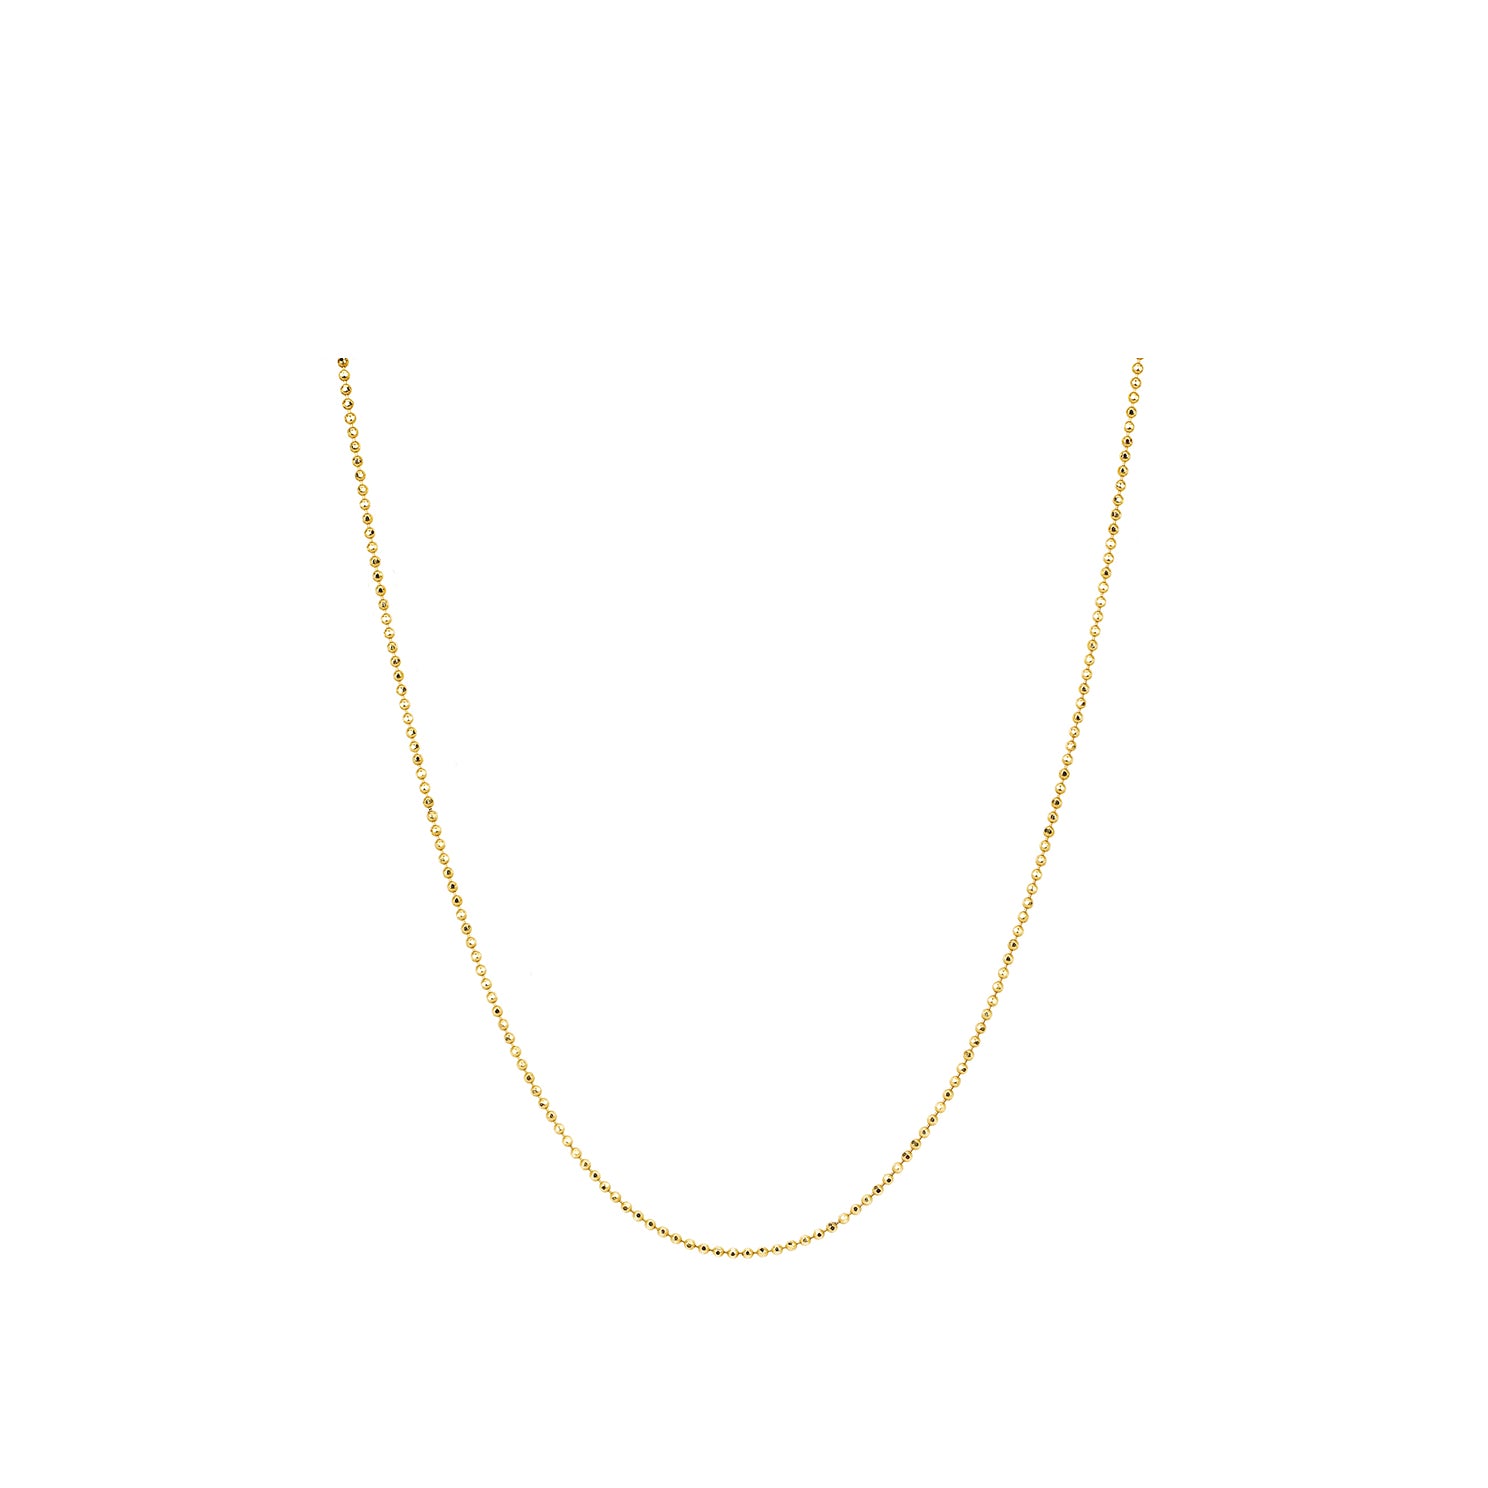 Gold Faceted Ball Chain in 14k yellow gold